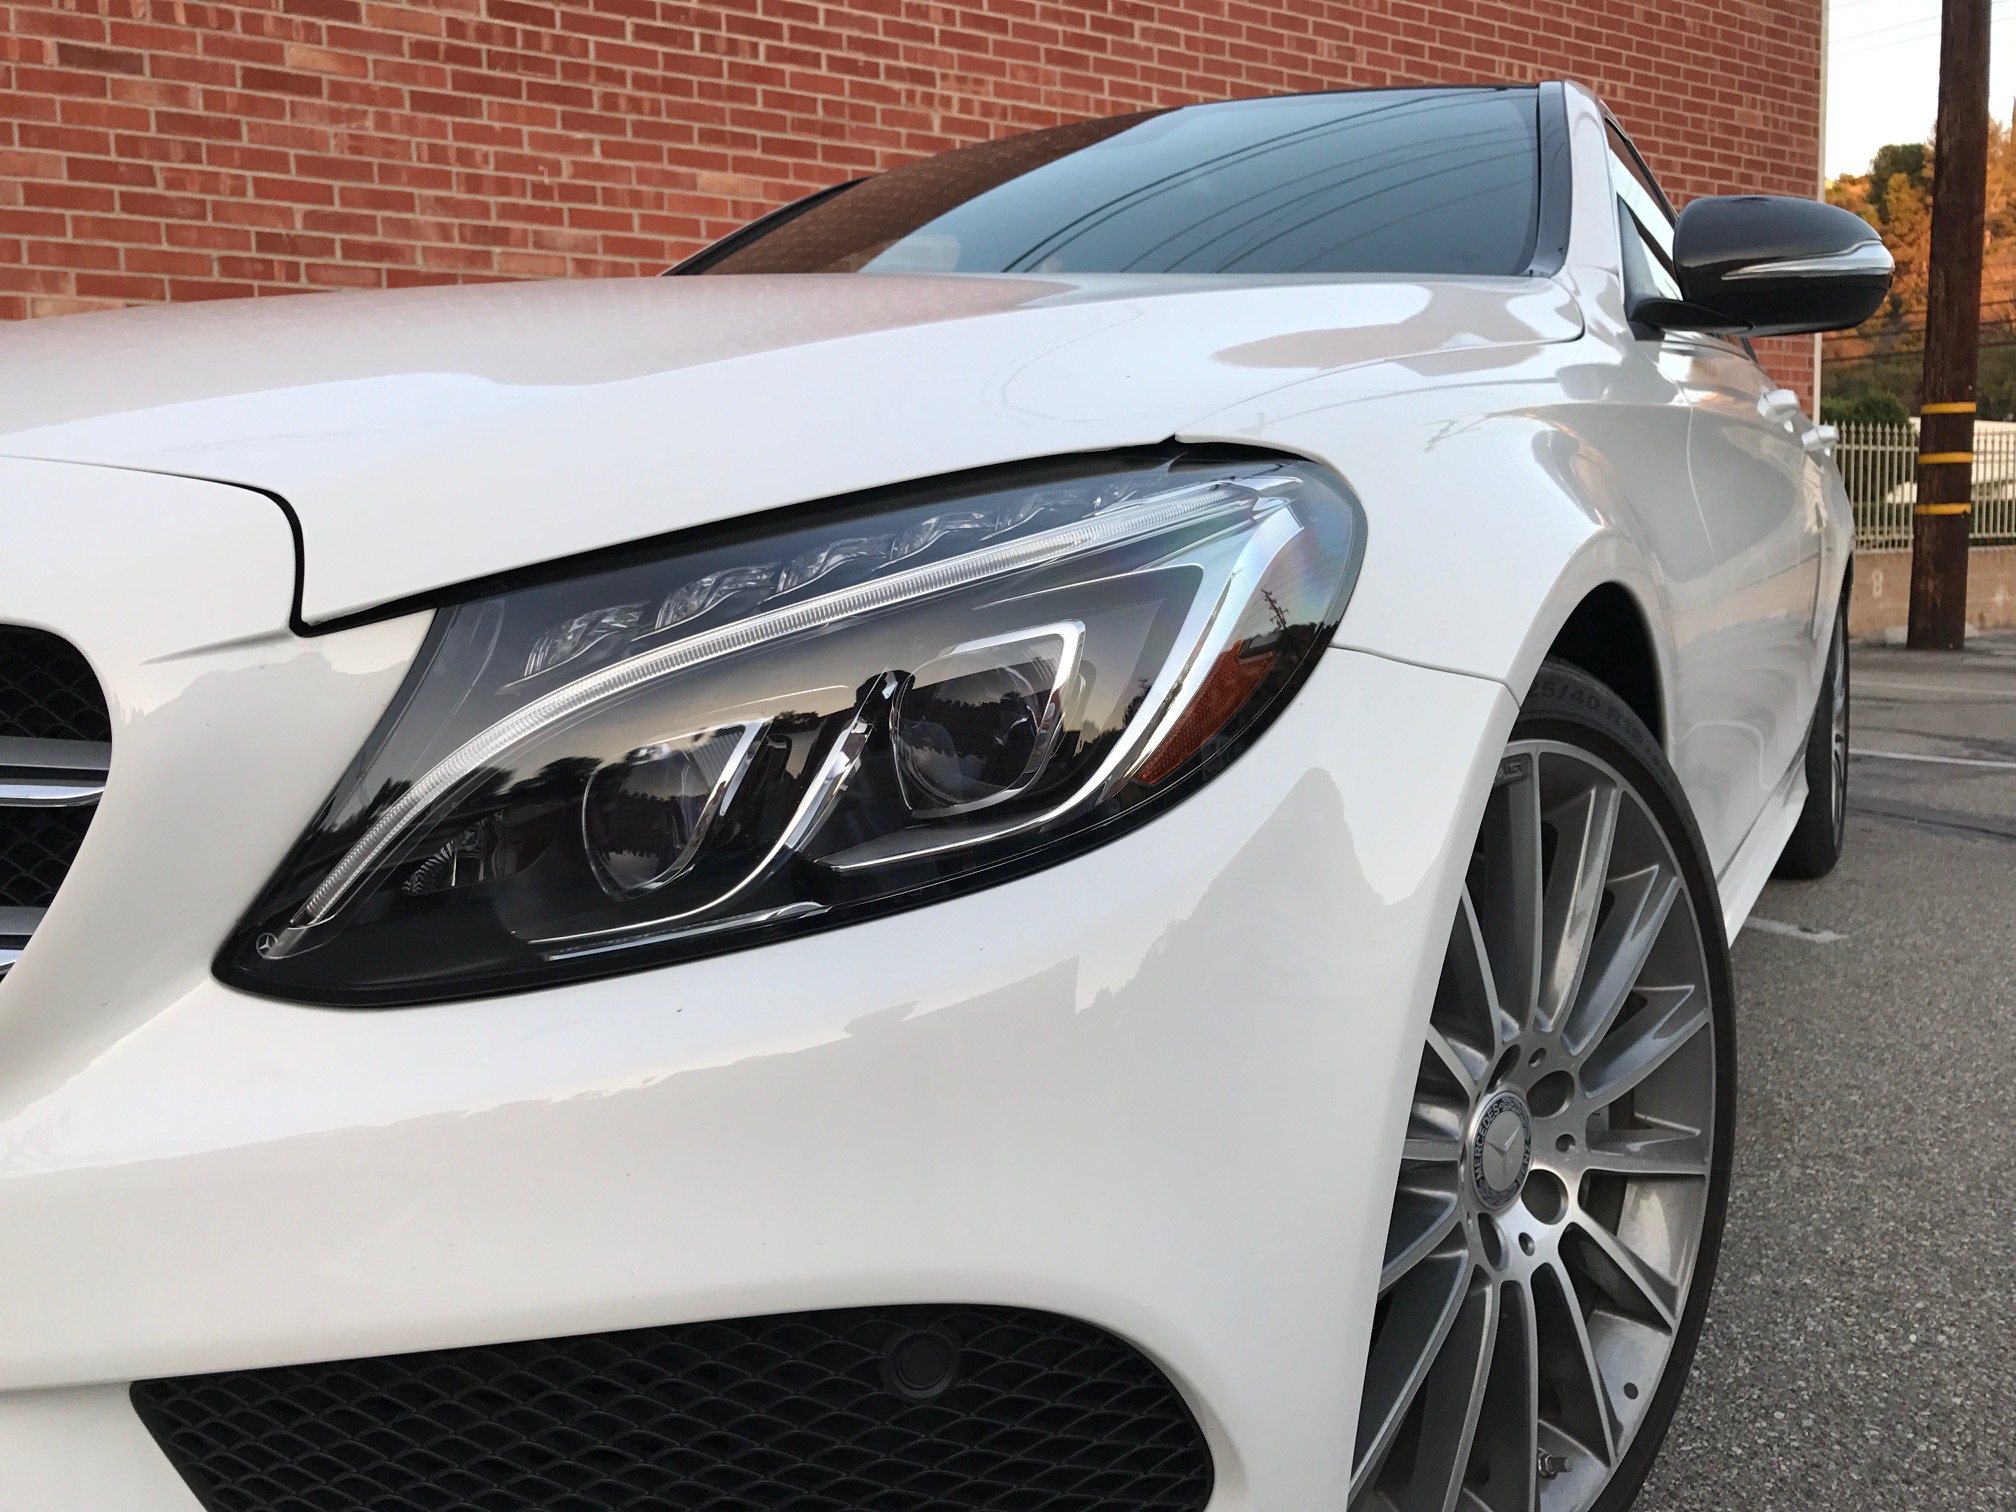 Lease Take Over 2015 Mercedes Benz C300 White On Red